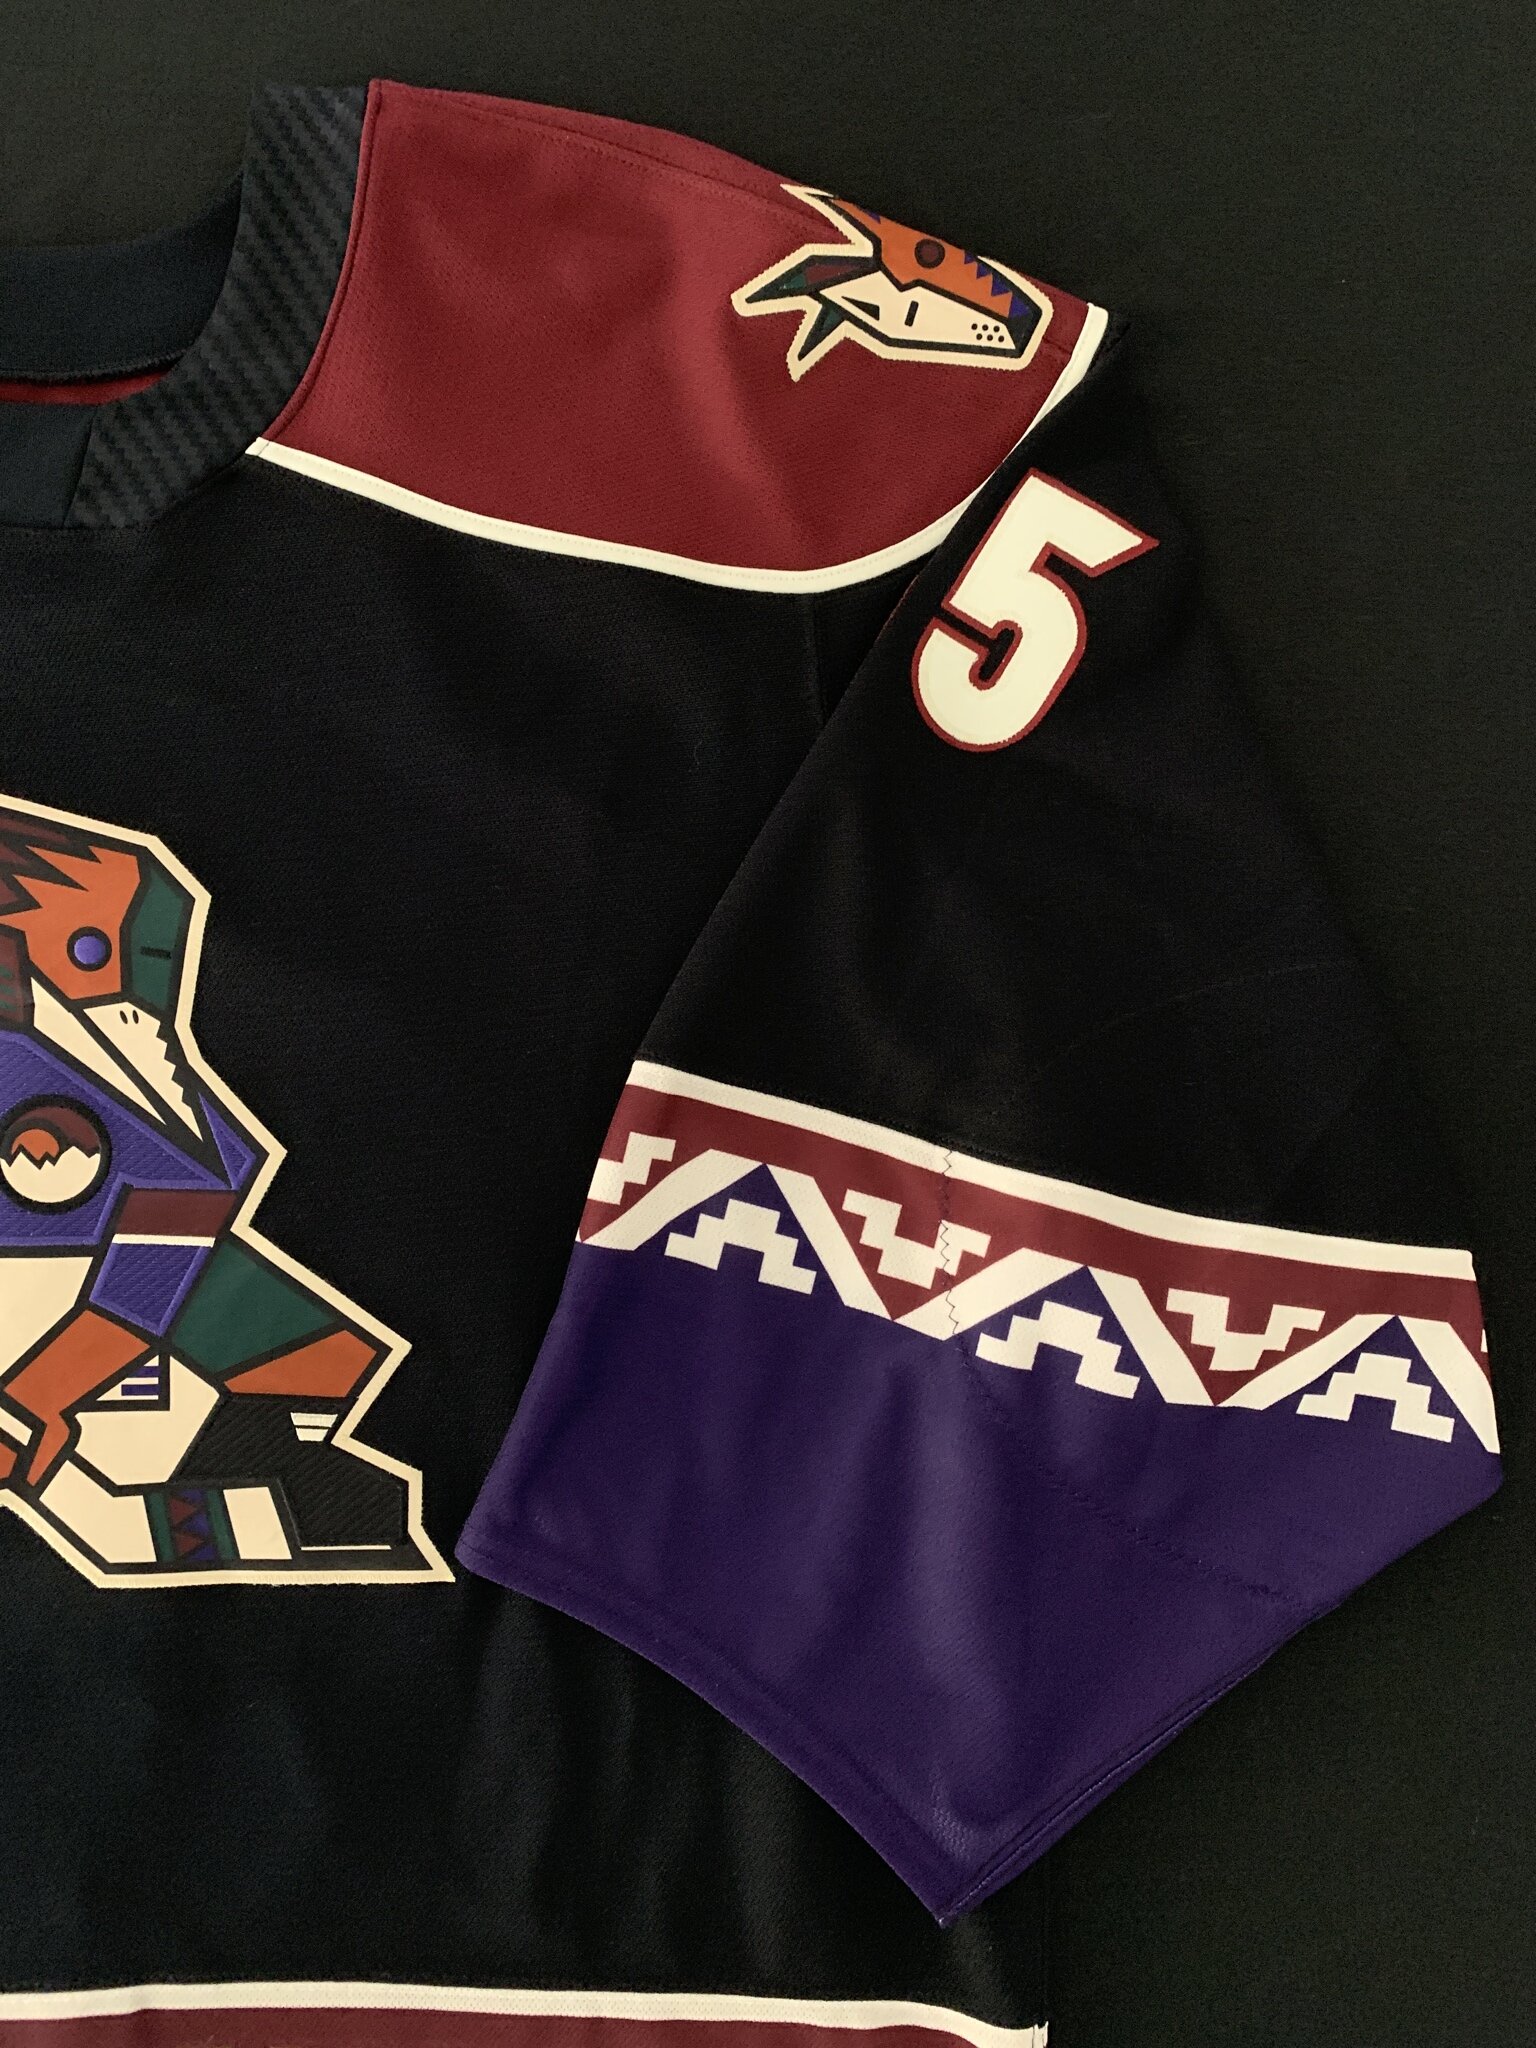 Darcy Kuemper Arizona Coyotes Autographed Kachina Alternate Adidas  Authentic Jersey with 25th Anniversary Season Jersey Patch